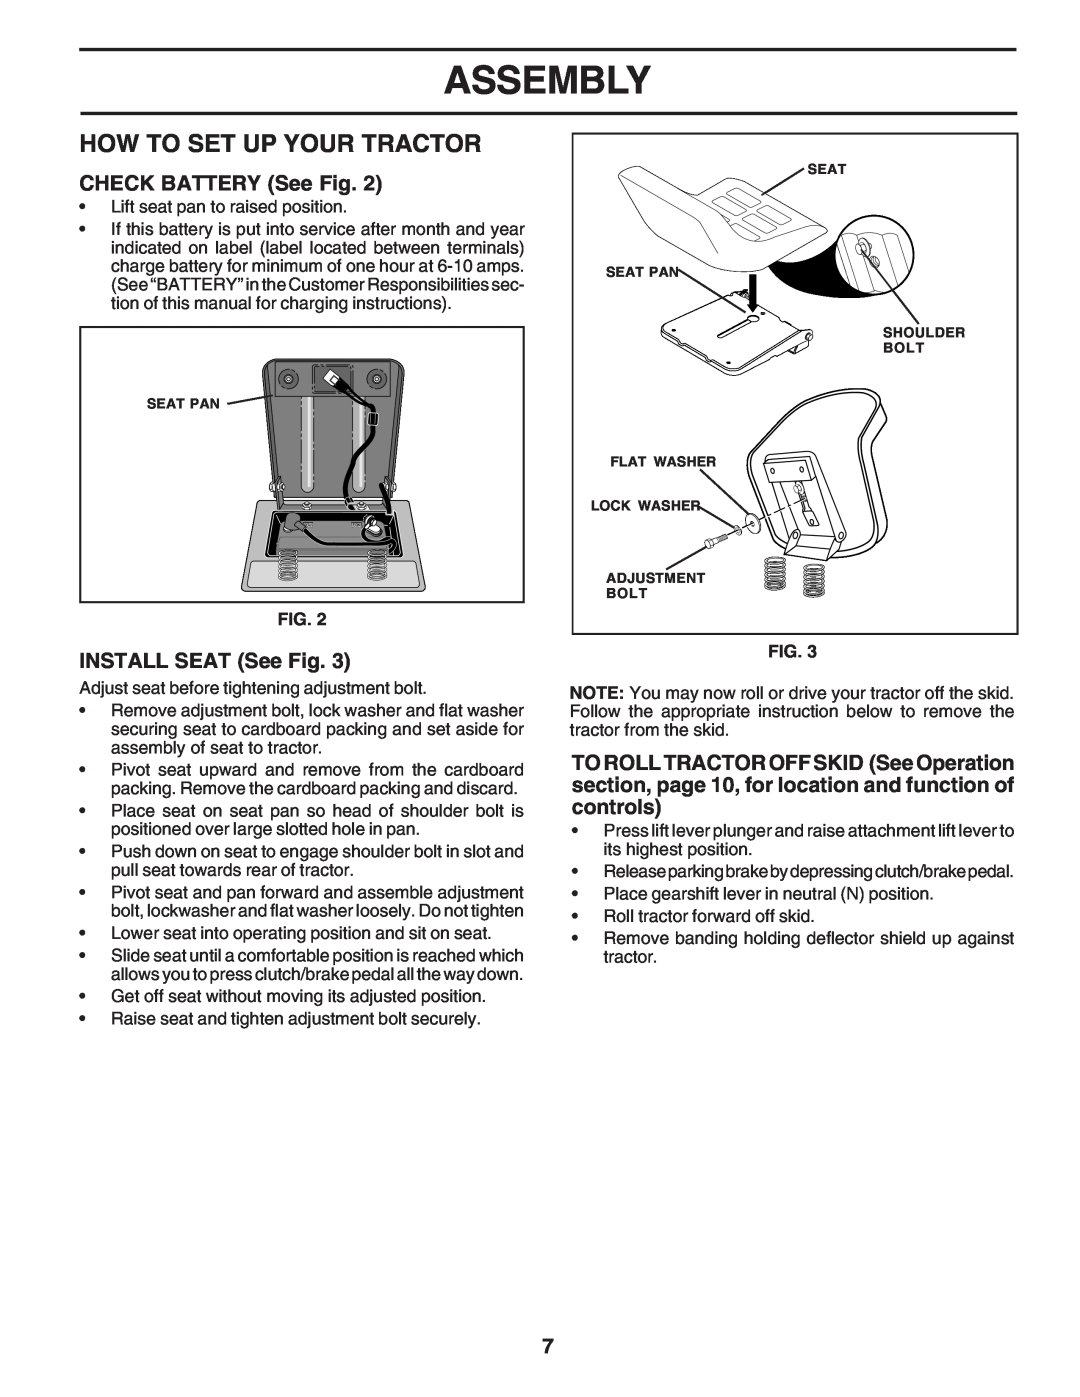 Weed Eater WE12538K manual How To Set Up Your Tractor, CHECK BATTERY See Fig, INSTALL SEAT See Fig, Assembly 